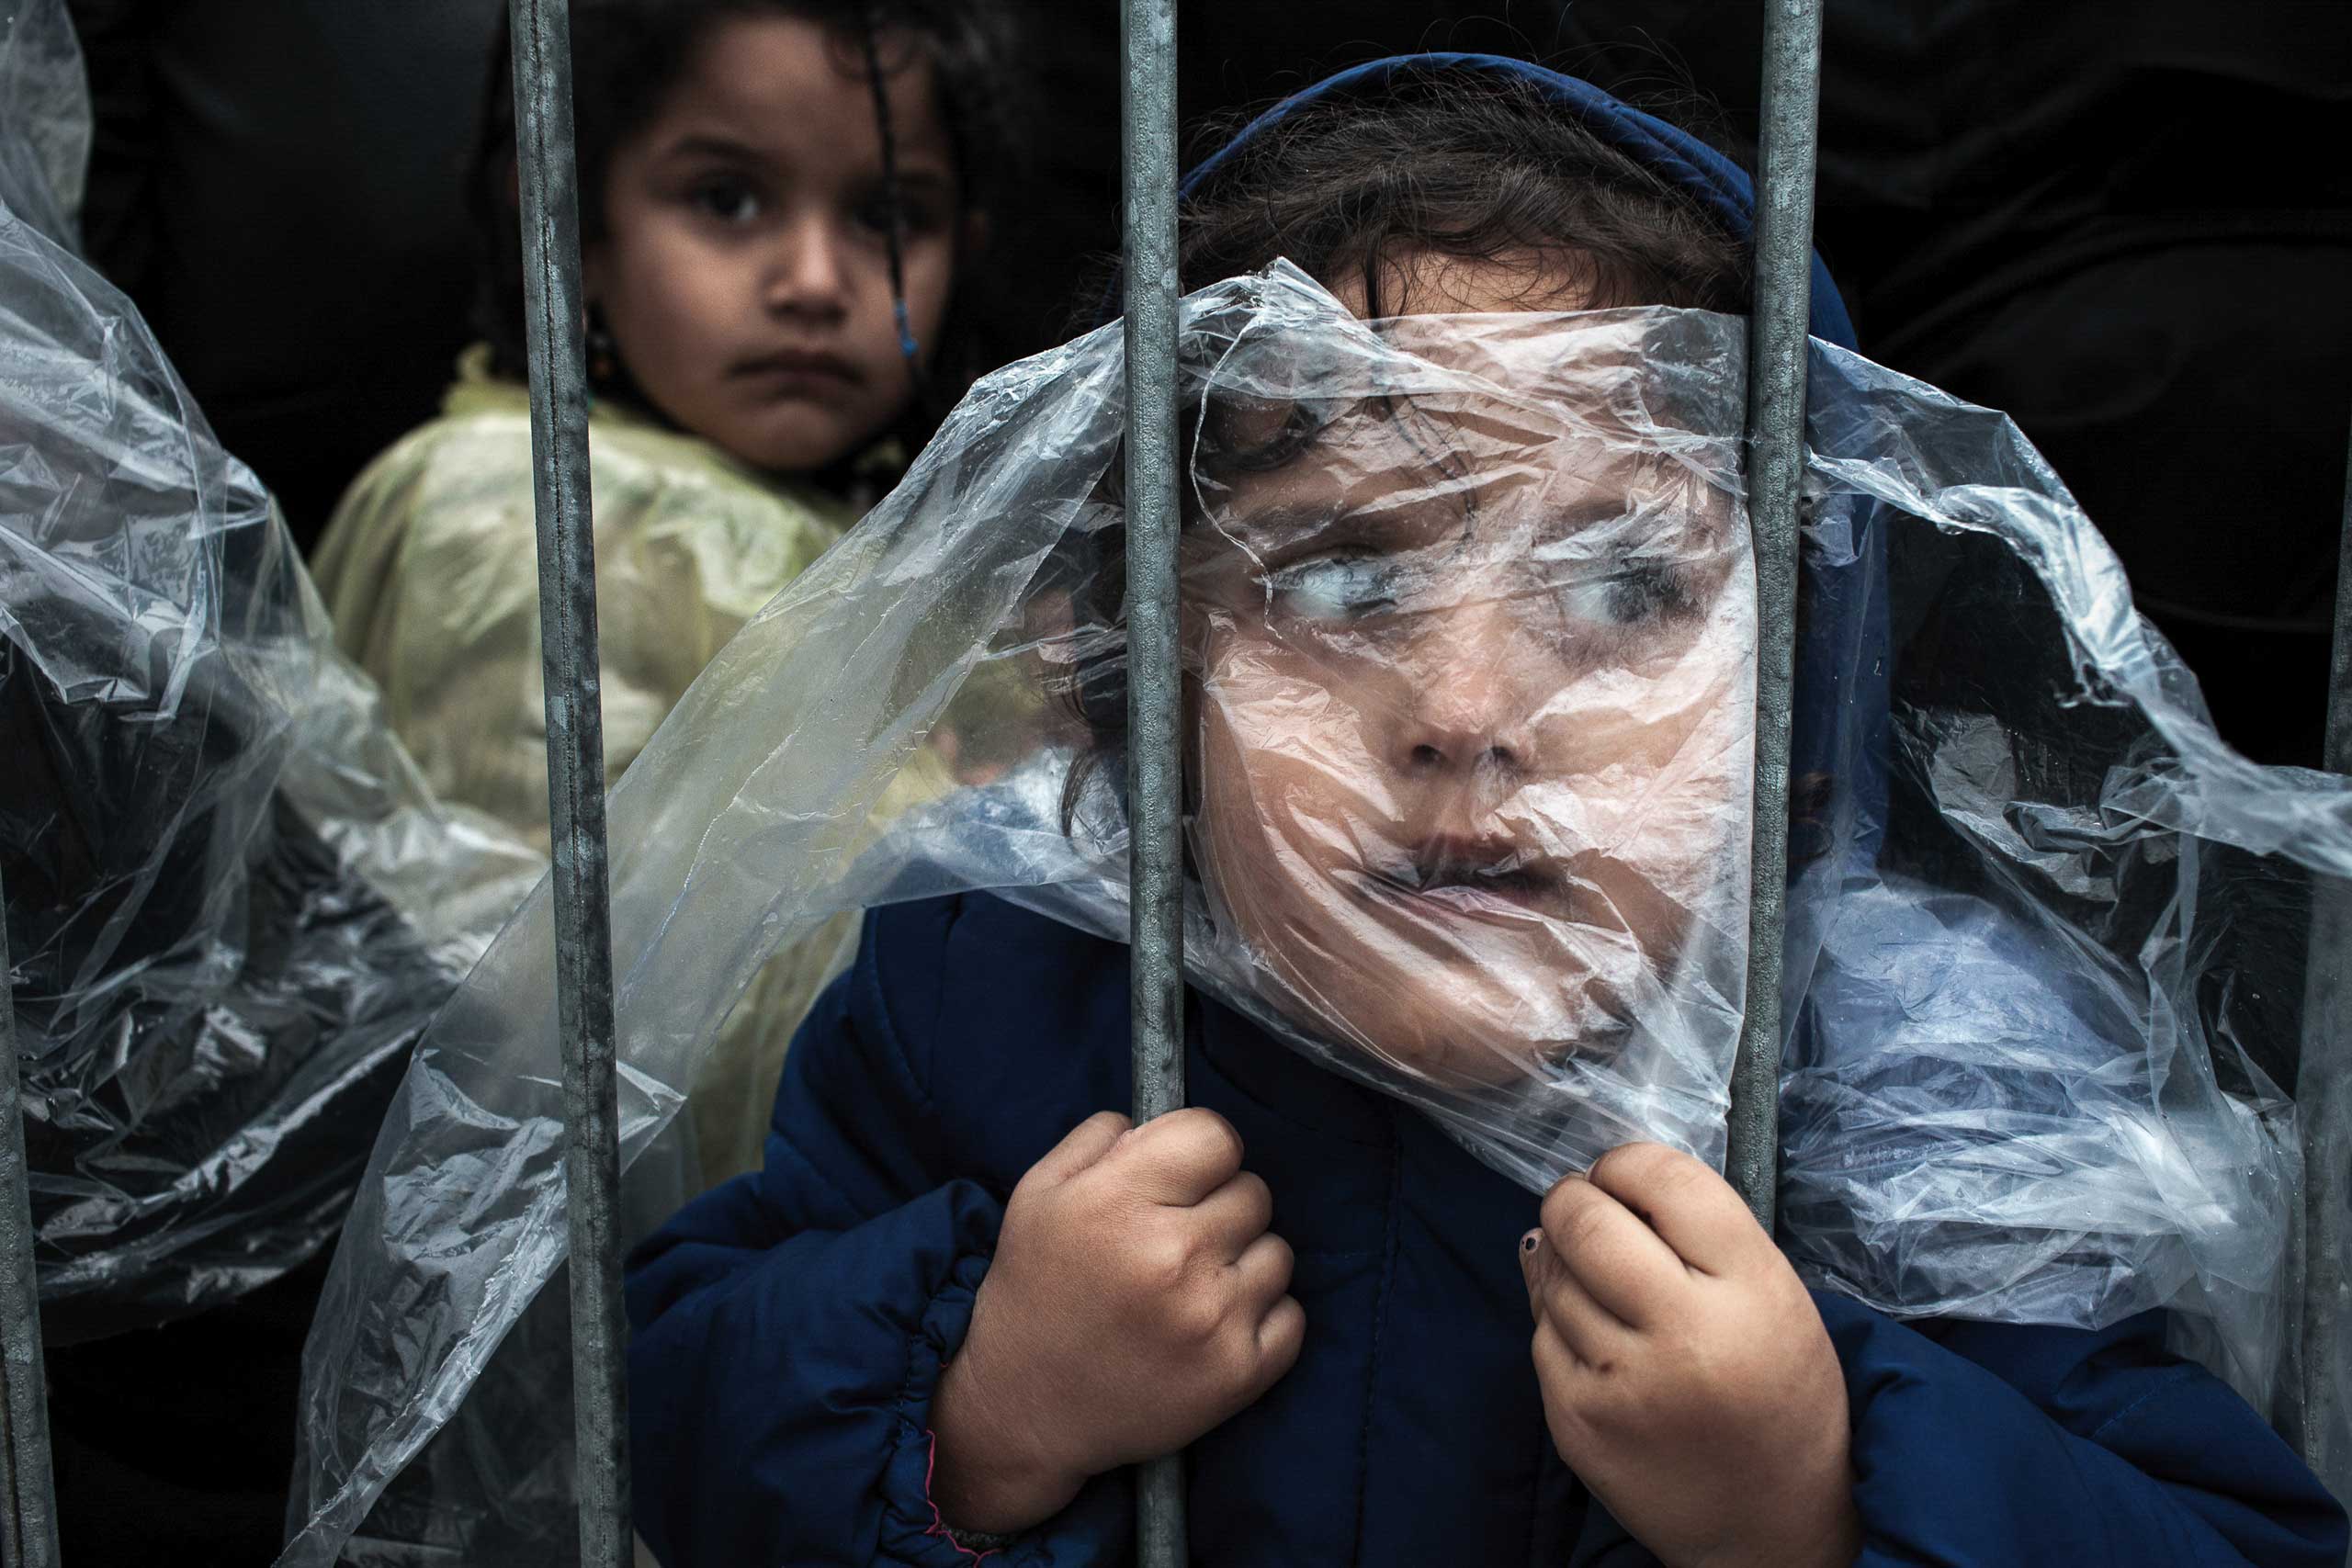 A child is covered with a raincoat while she waits in line to register at a refugee camp in Preševo, Serbia, Oct. 7, 2015. (Matic Zorman)